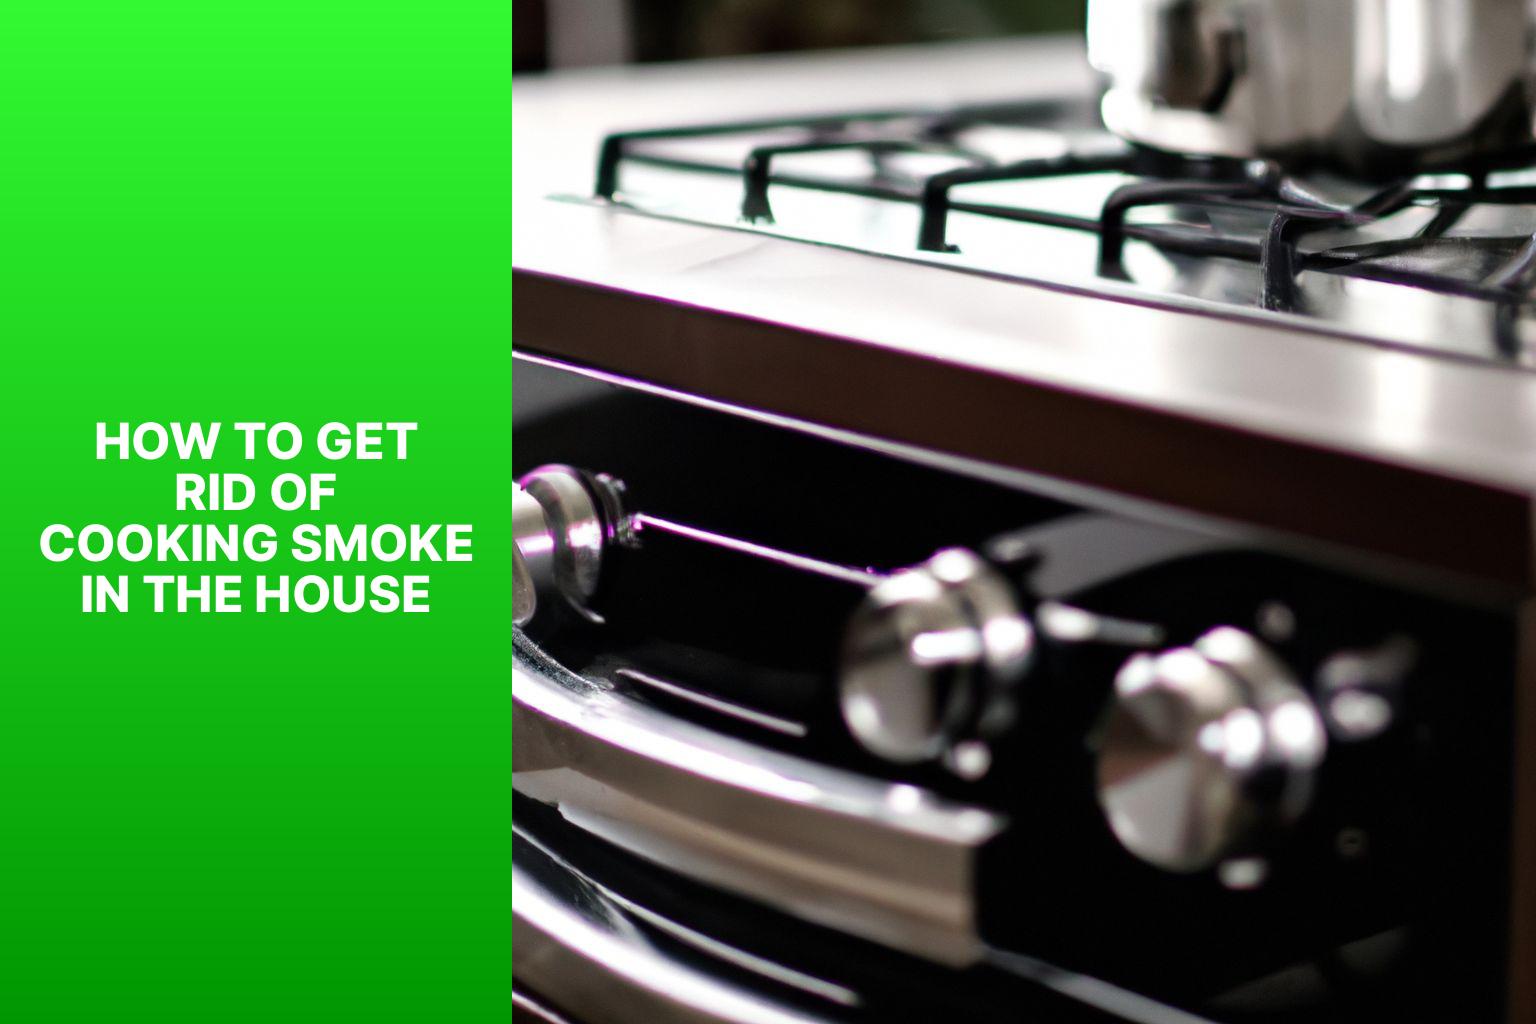 How To Get Rid Of Cooking Smoke In The House